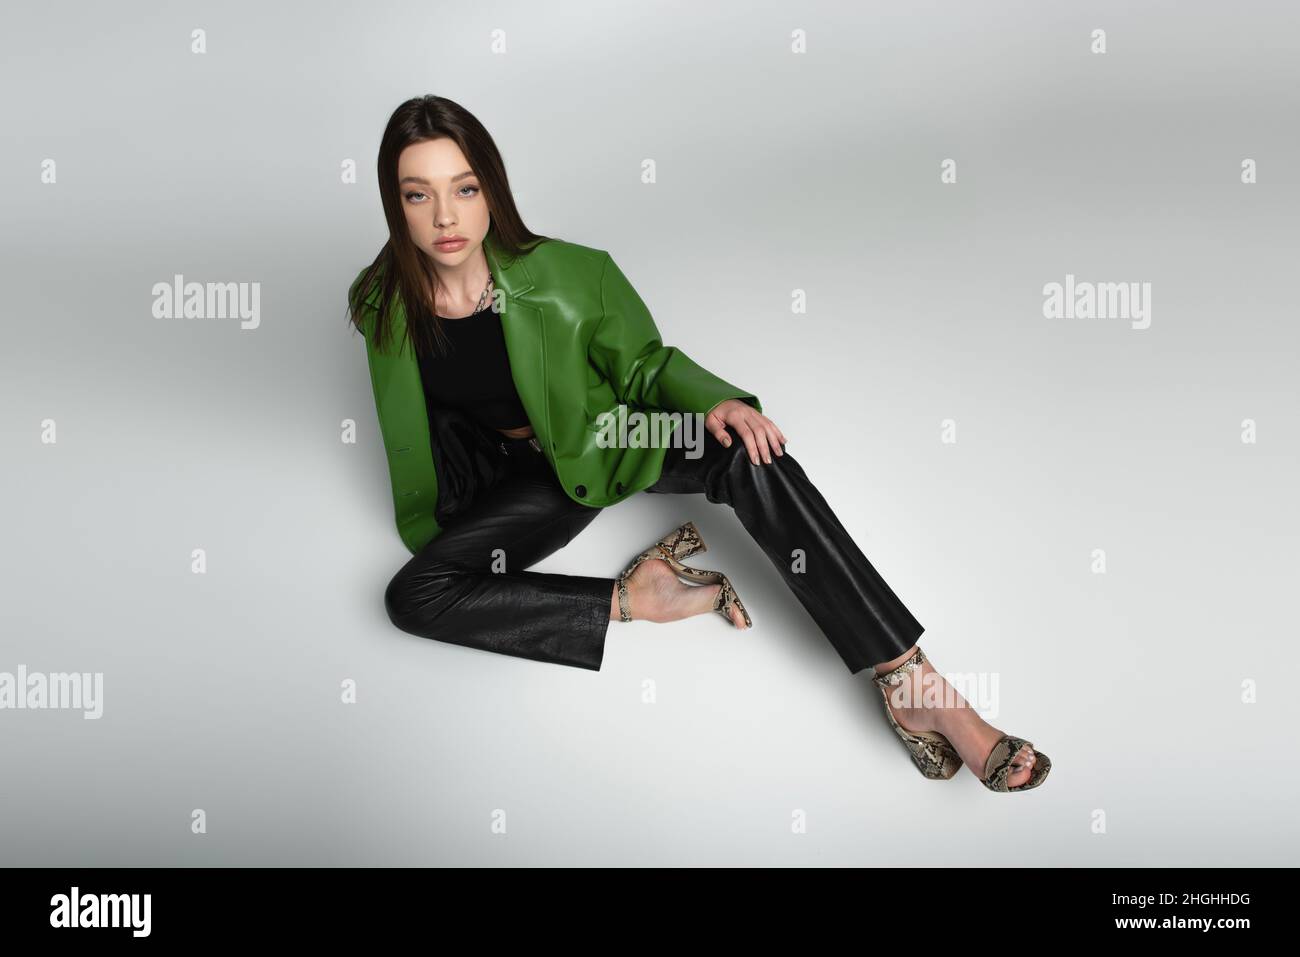 high angle view of woman in black trousers, green jacket and sandals sitting on grey Stock Photo